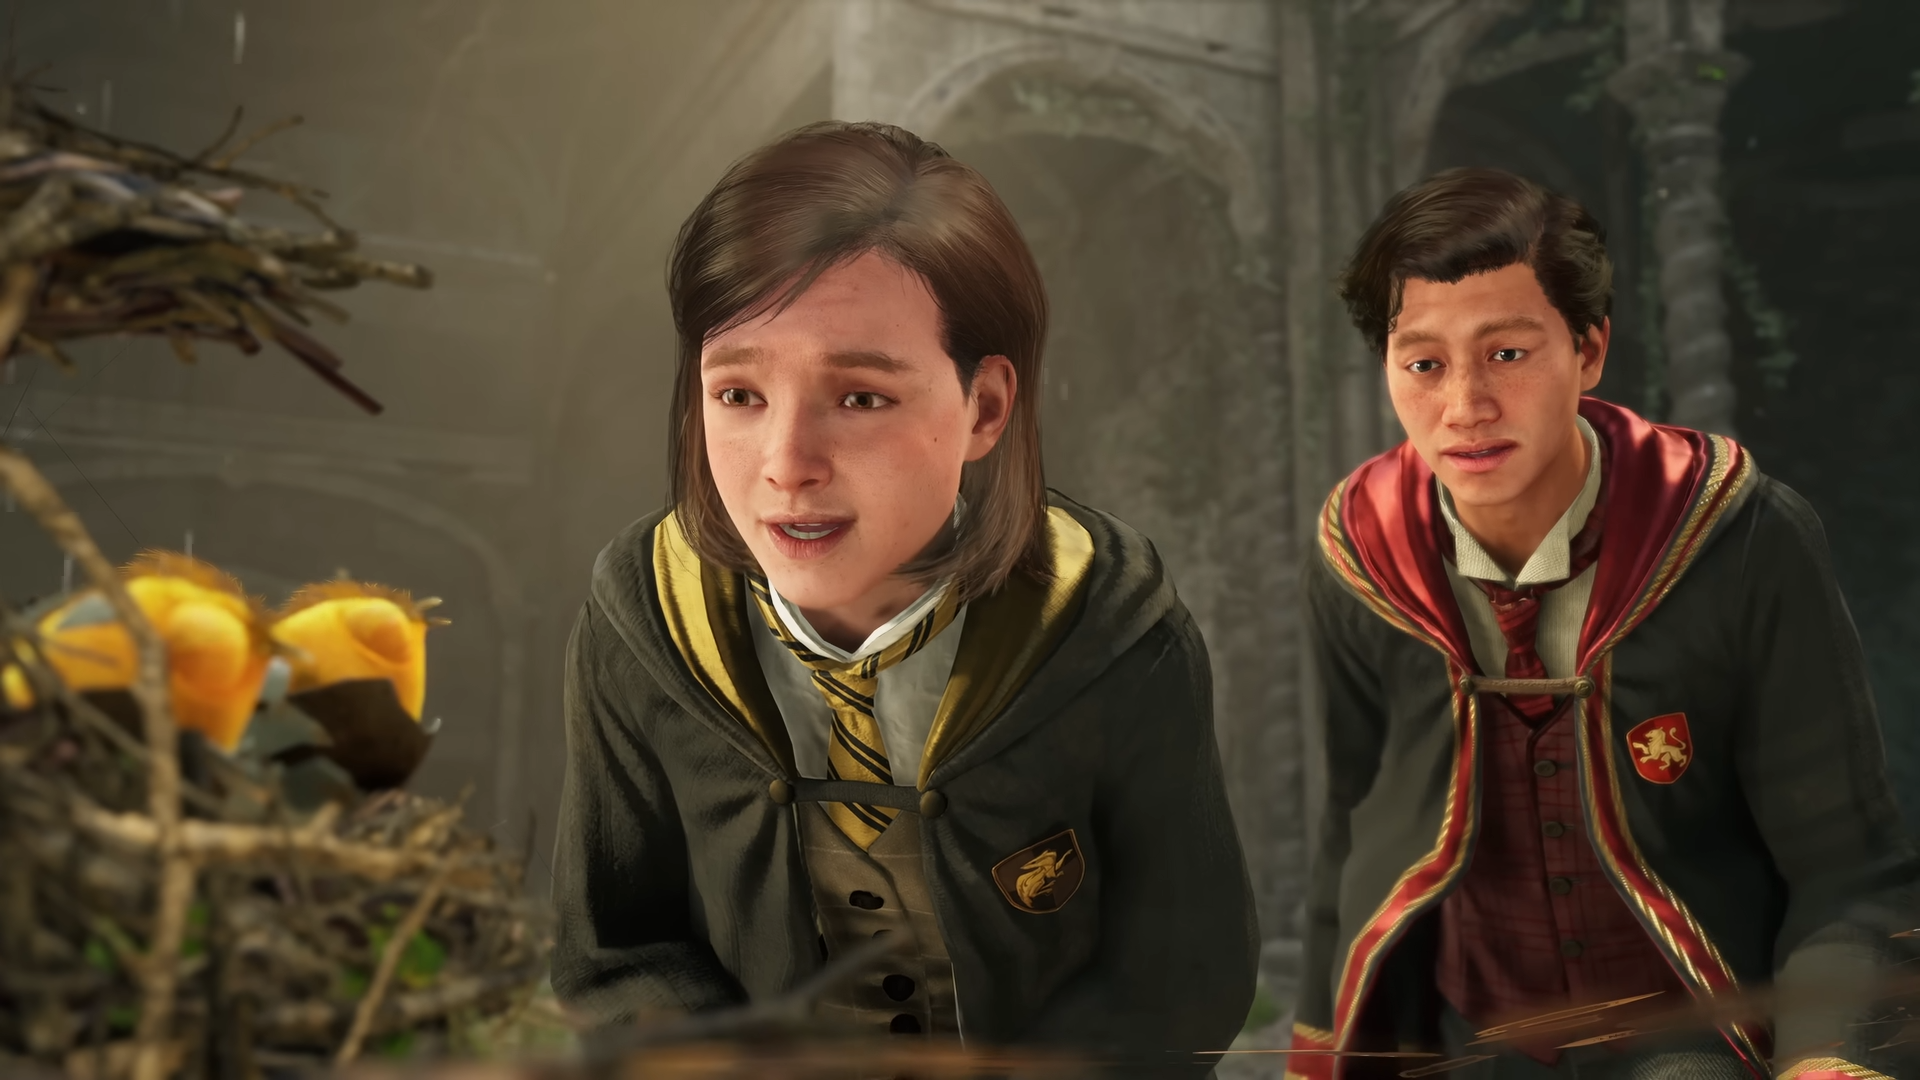 How to Play Hogwarts Legacy Early: A Thorough Guide!